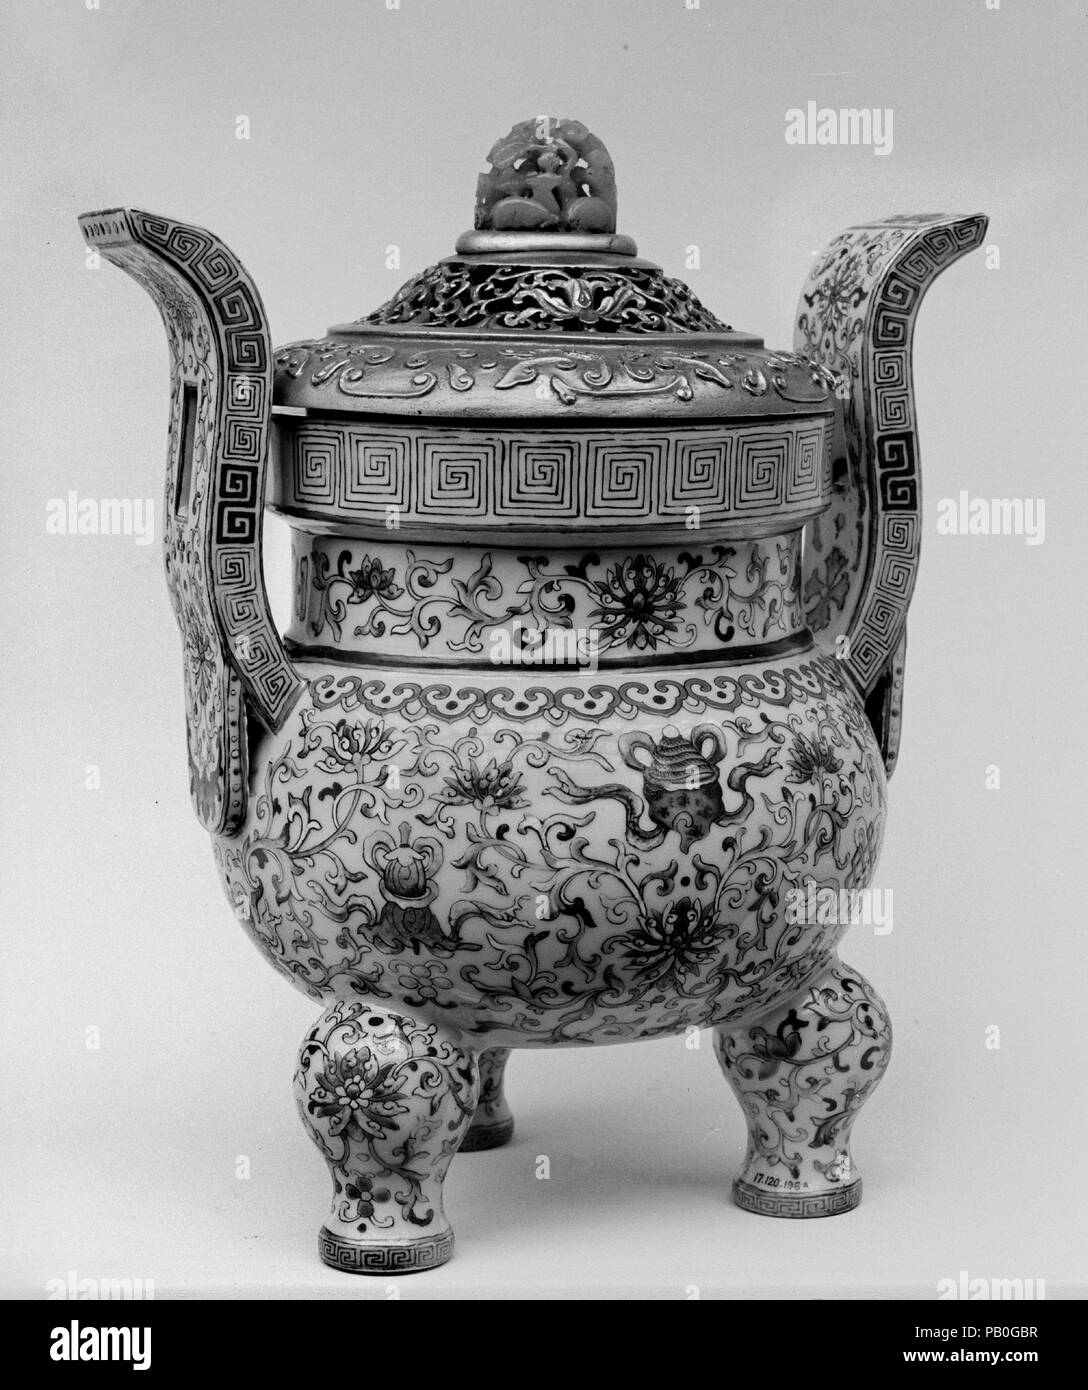 Incense Burner. Culture: China. Dimensions: H. with cover: 12 1/2 in. (31.8 cm). Museum: Metropolitan Museum of Art, New York, USA. Stock Photo